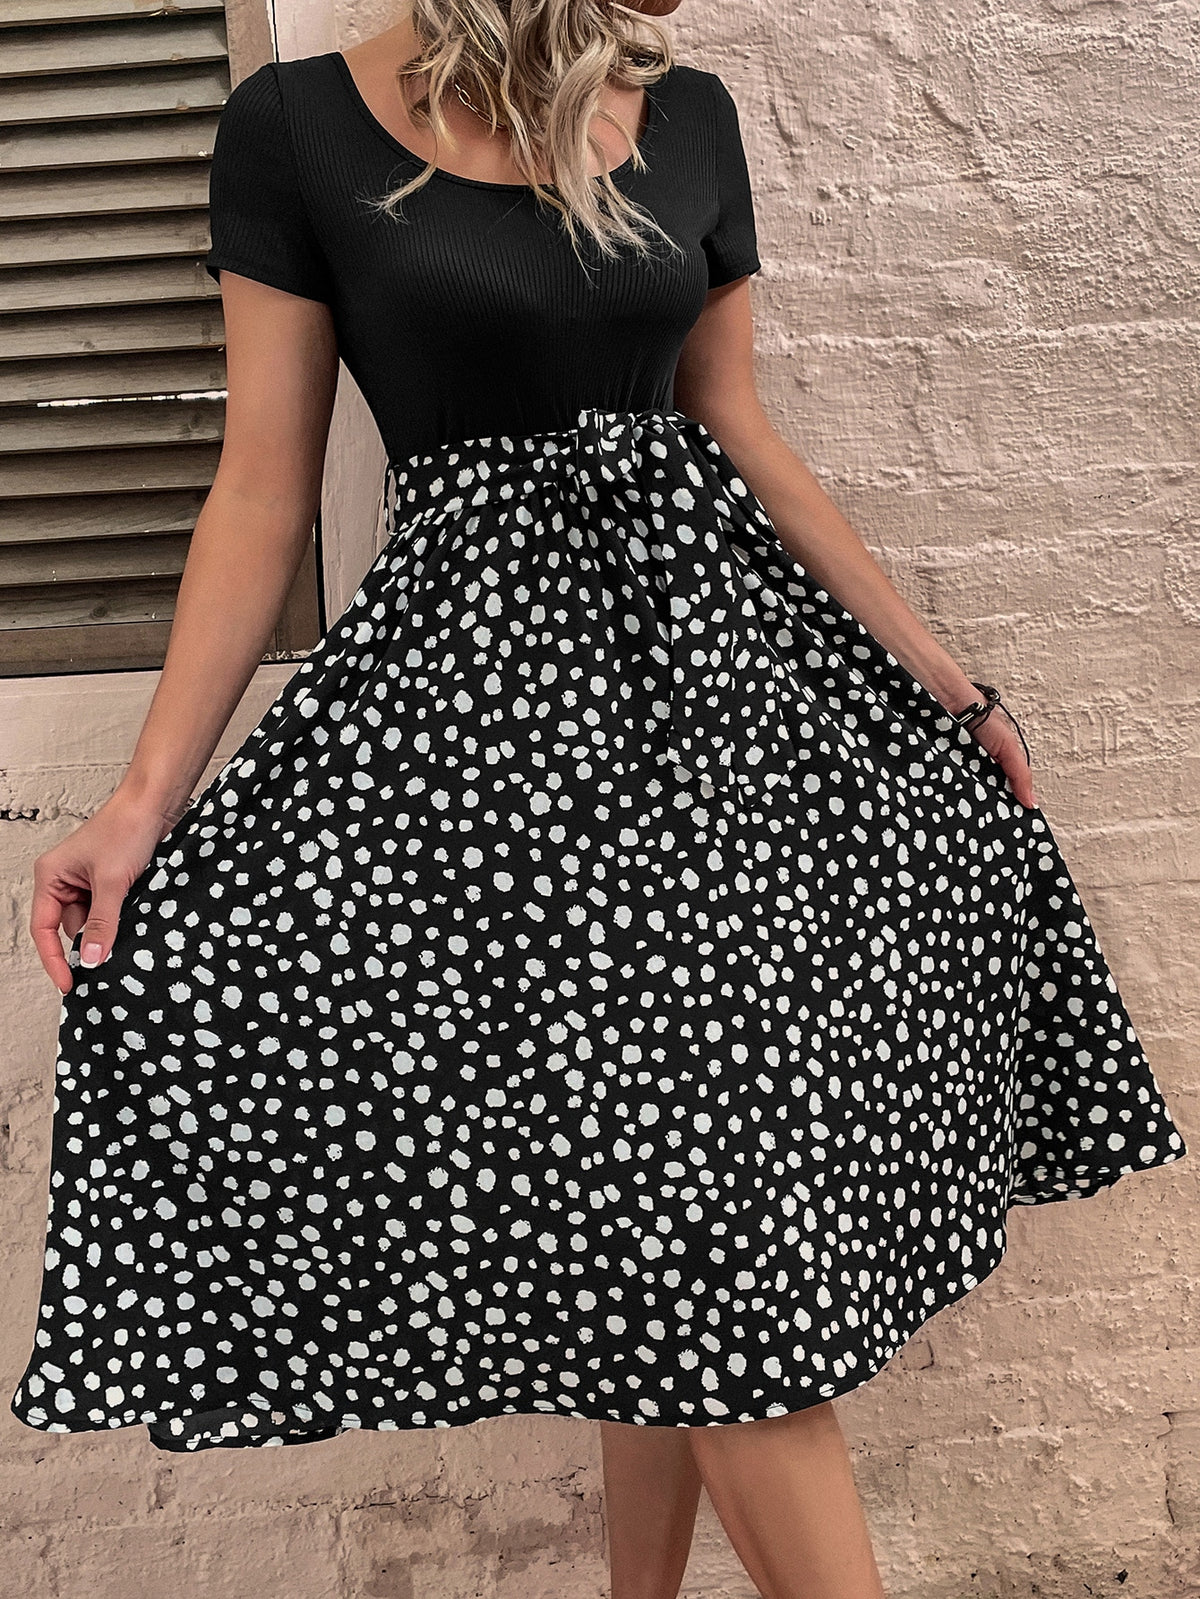 Dotted Print Belted Dress - Black and White / XL